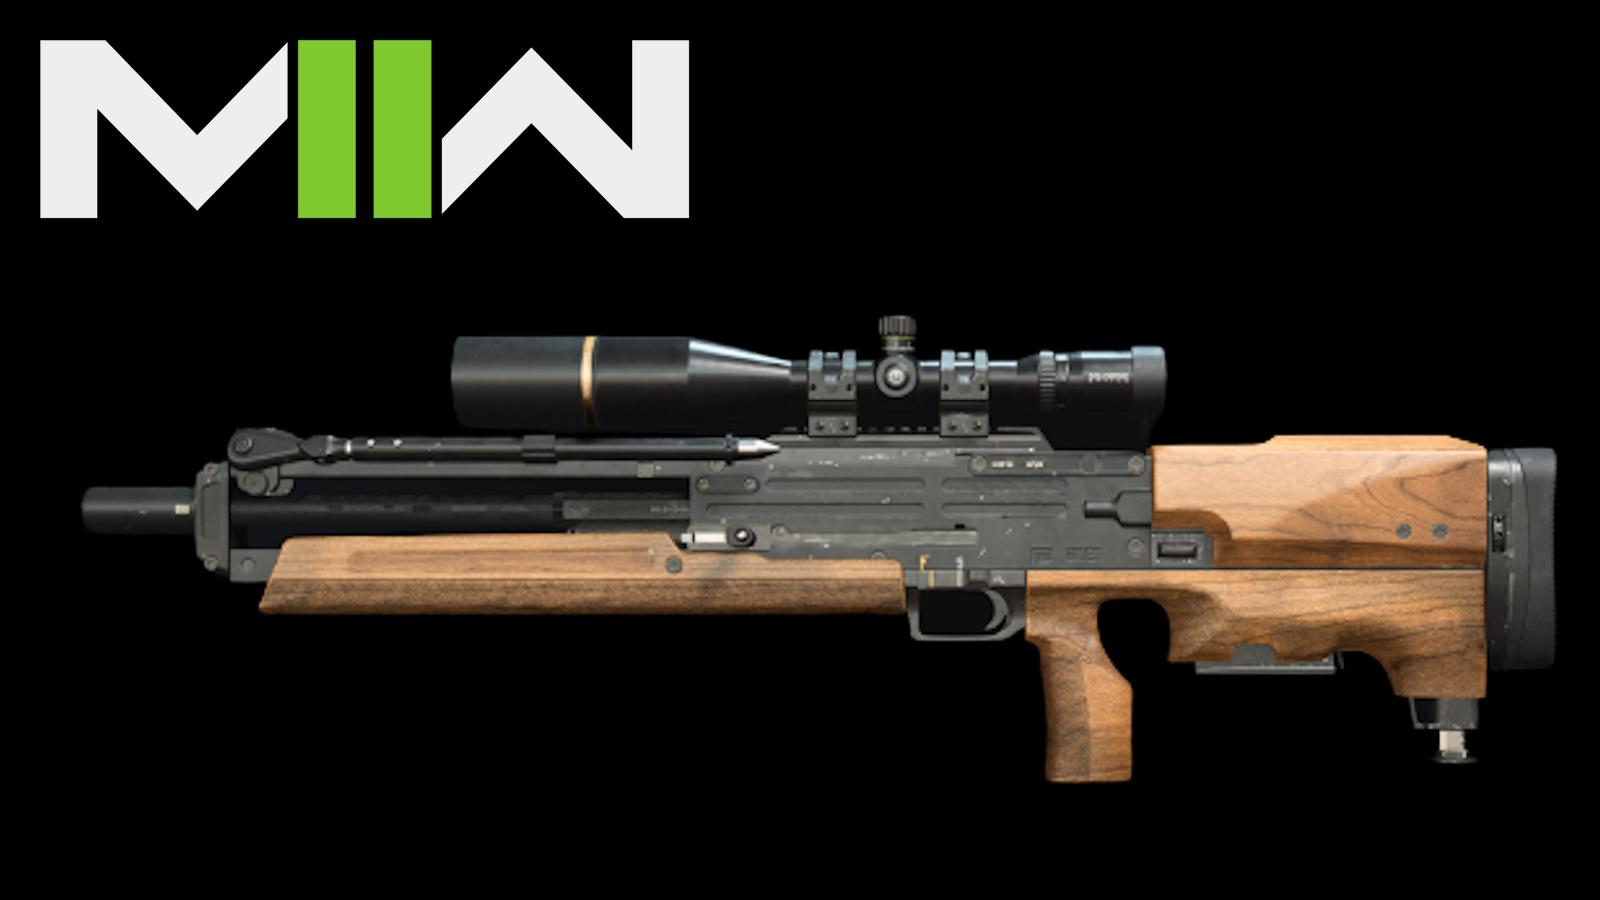 The Carrack .300 sniper rifle from Modern Warfare 2 based on the Walther WA2000.